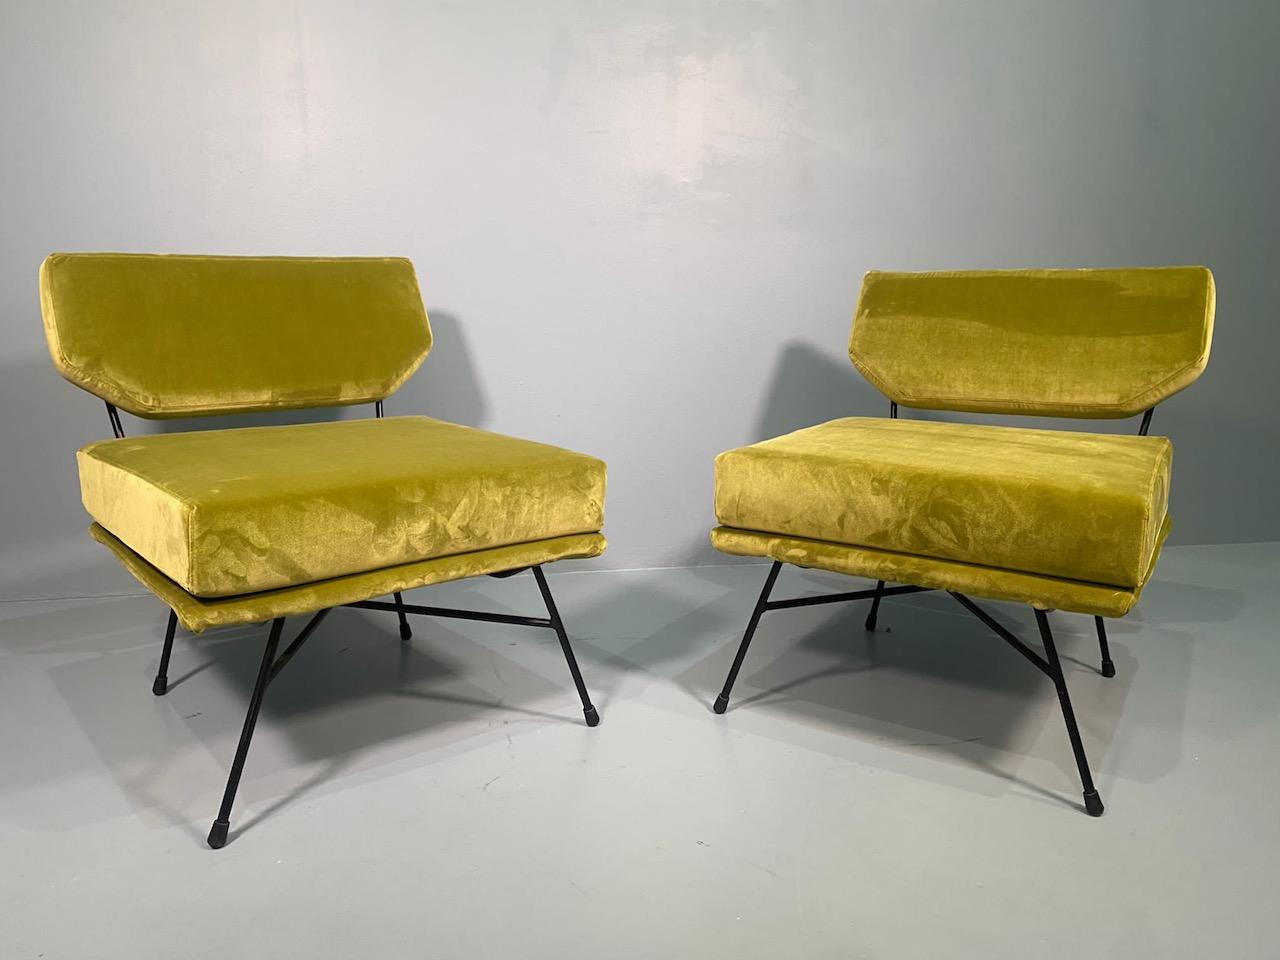 Pair of 'Elettra' Lounge Chairs by BBPR, Arflex, Italy 1953, Compasso D'Oro 1954 For Sale 6